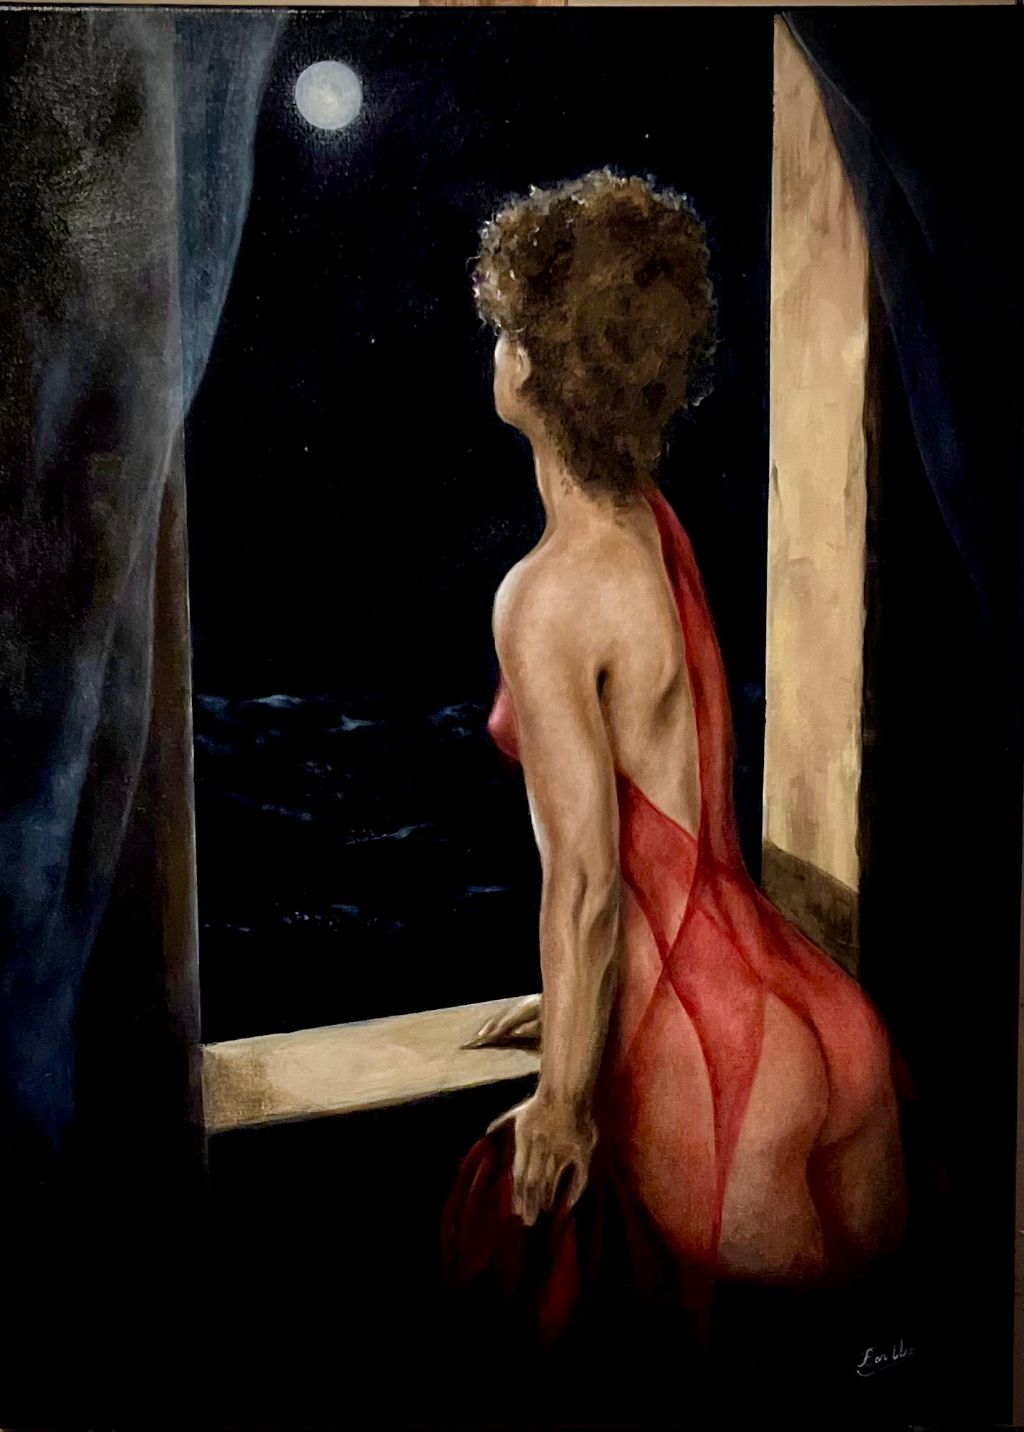 The View
Oil
Michael Barilla
18 in X 24 in
Semi nude woman gazing at the moon.